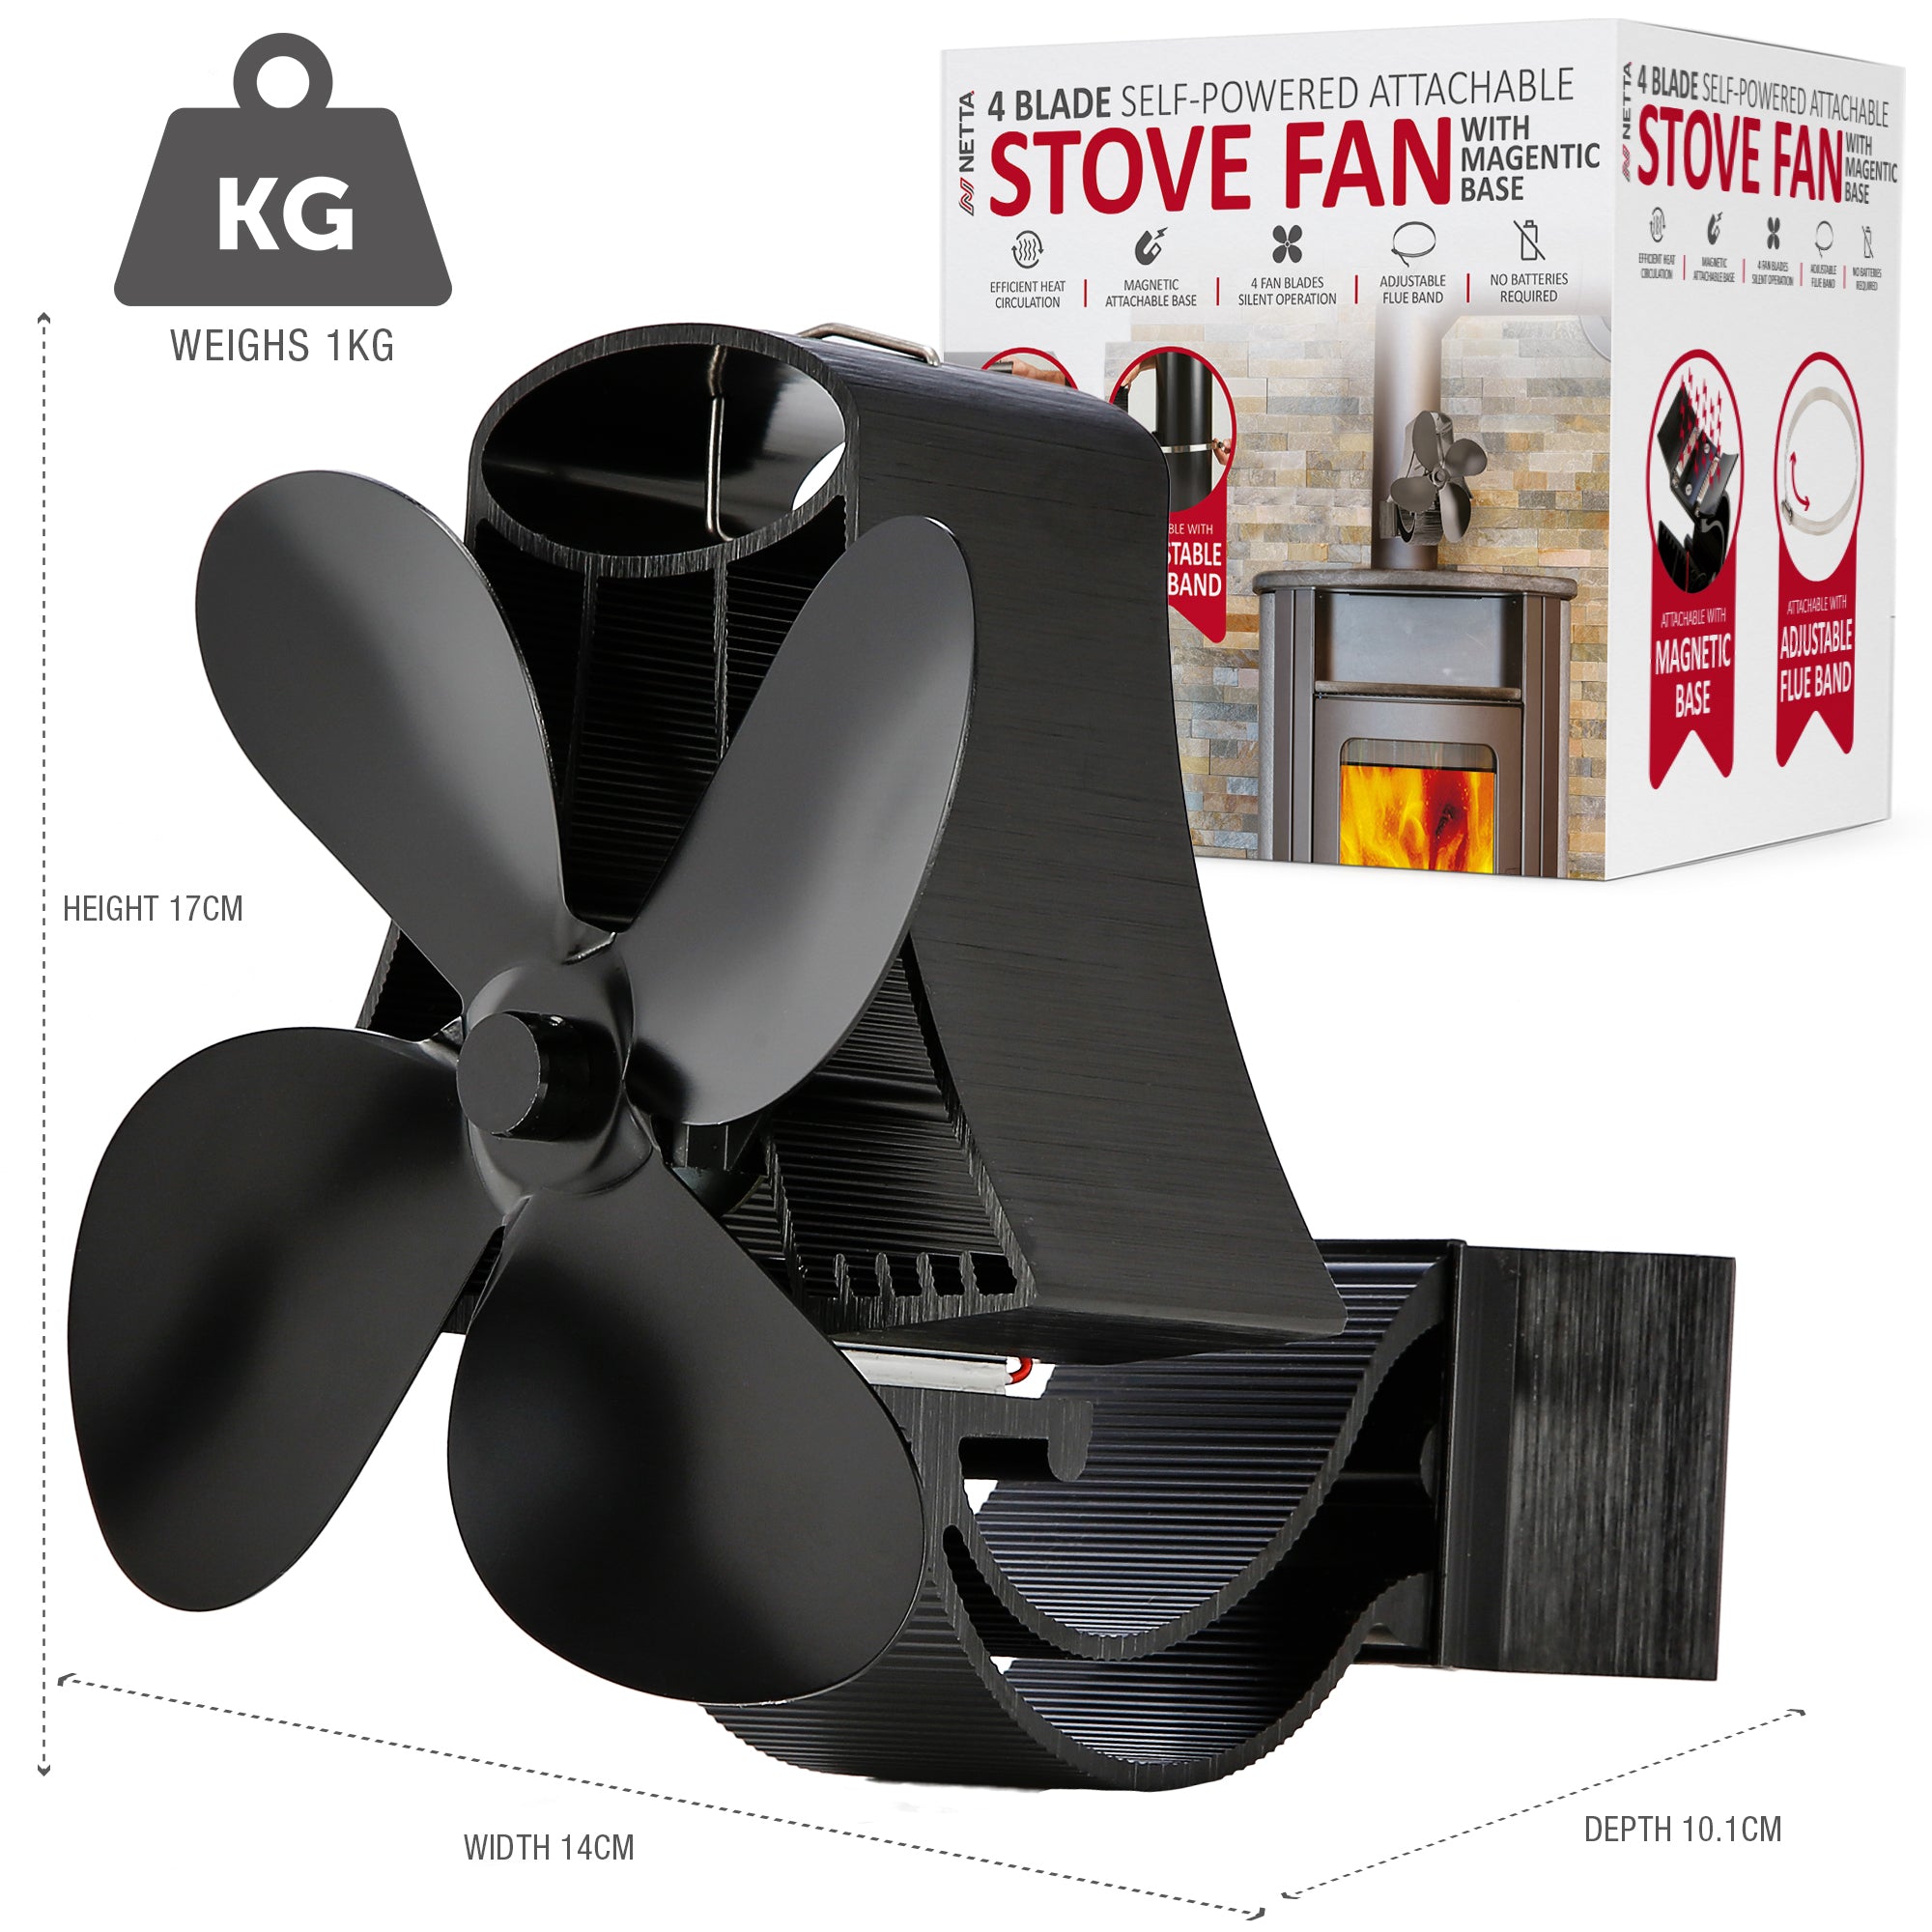 NETTA Magnetic 4 Blade Heat-Powered Stove Fan with Adjustable Flue Band